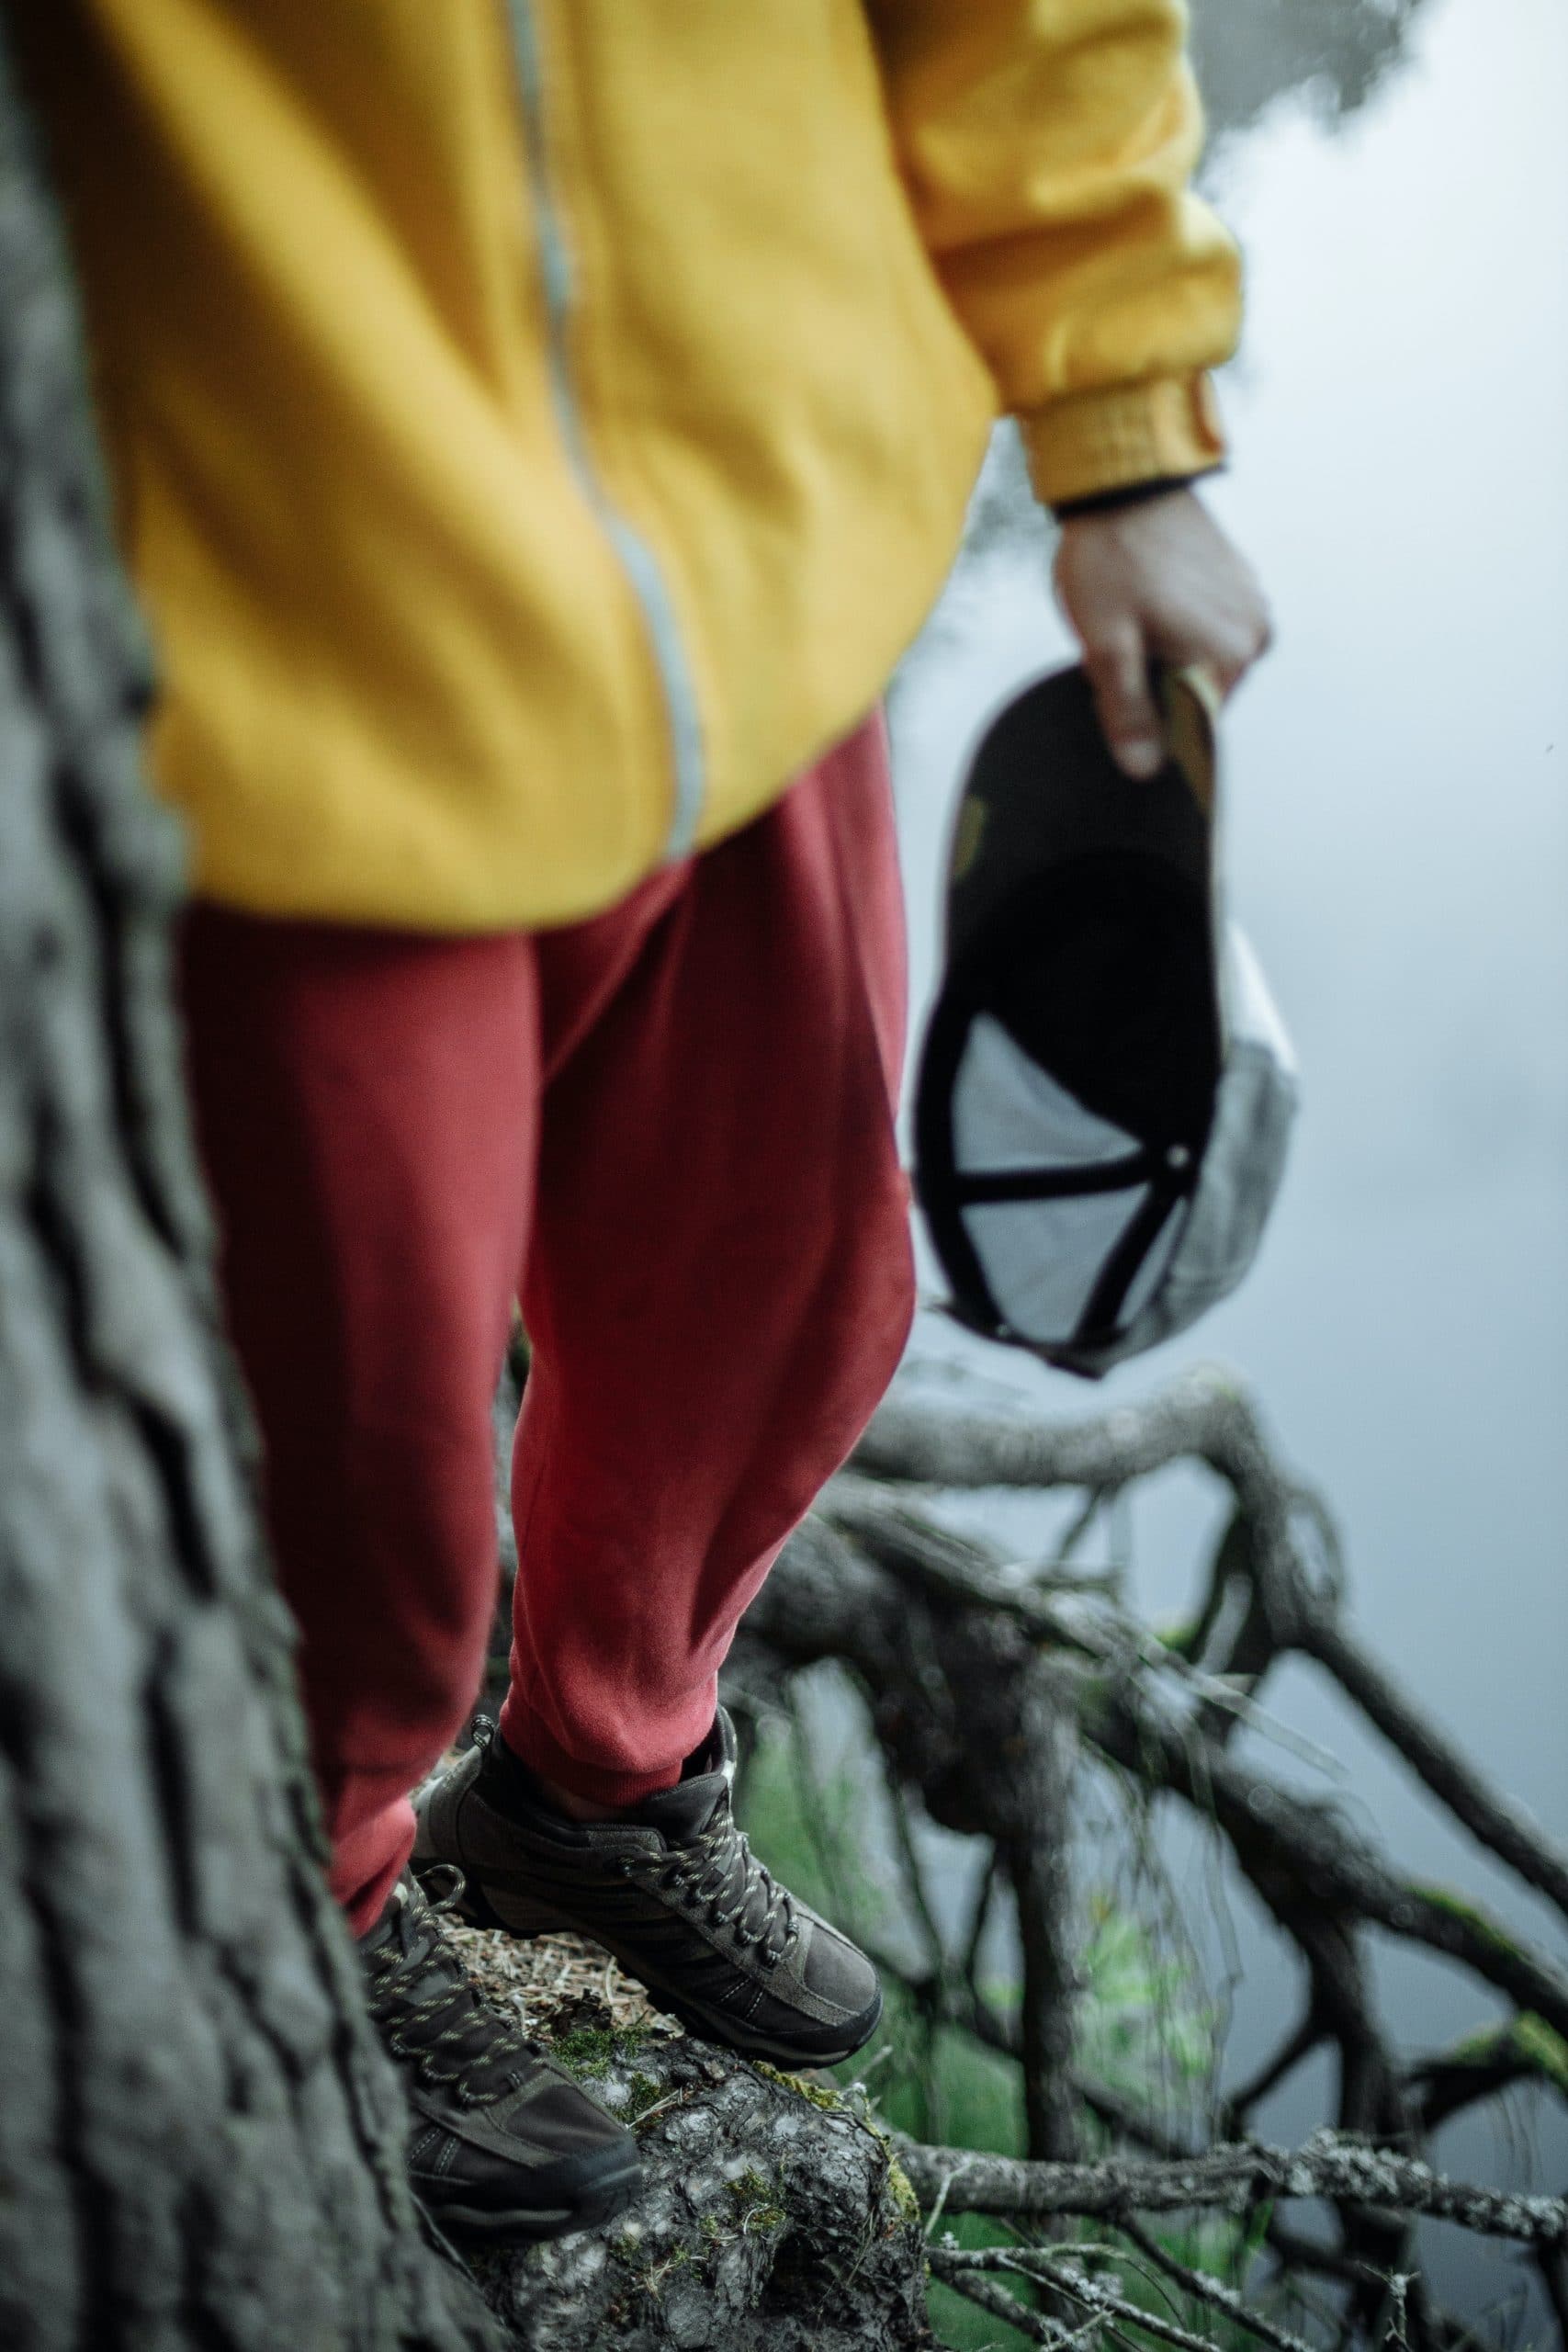 close up shot of young child with yellow sweetshirt and red sweat pants hold a hand and walking on a tree root next to a lake